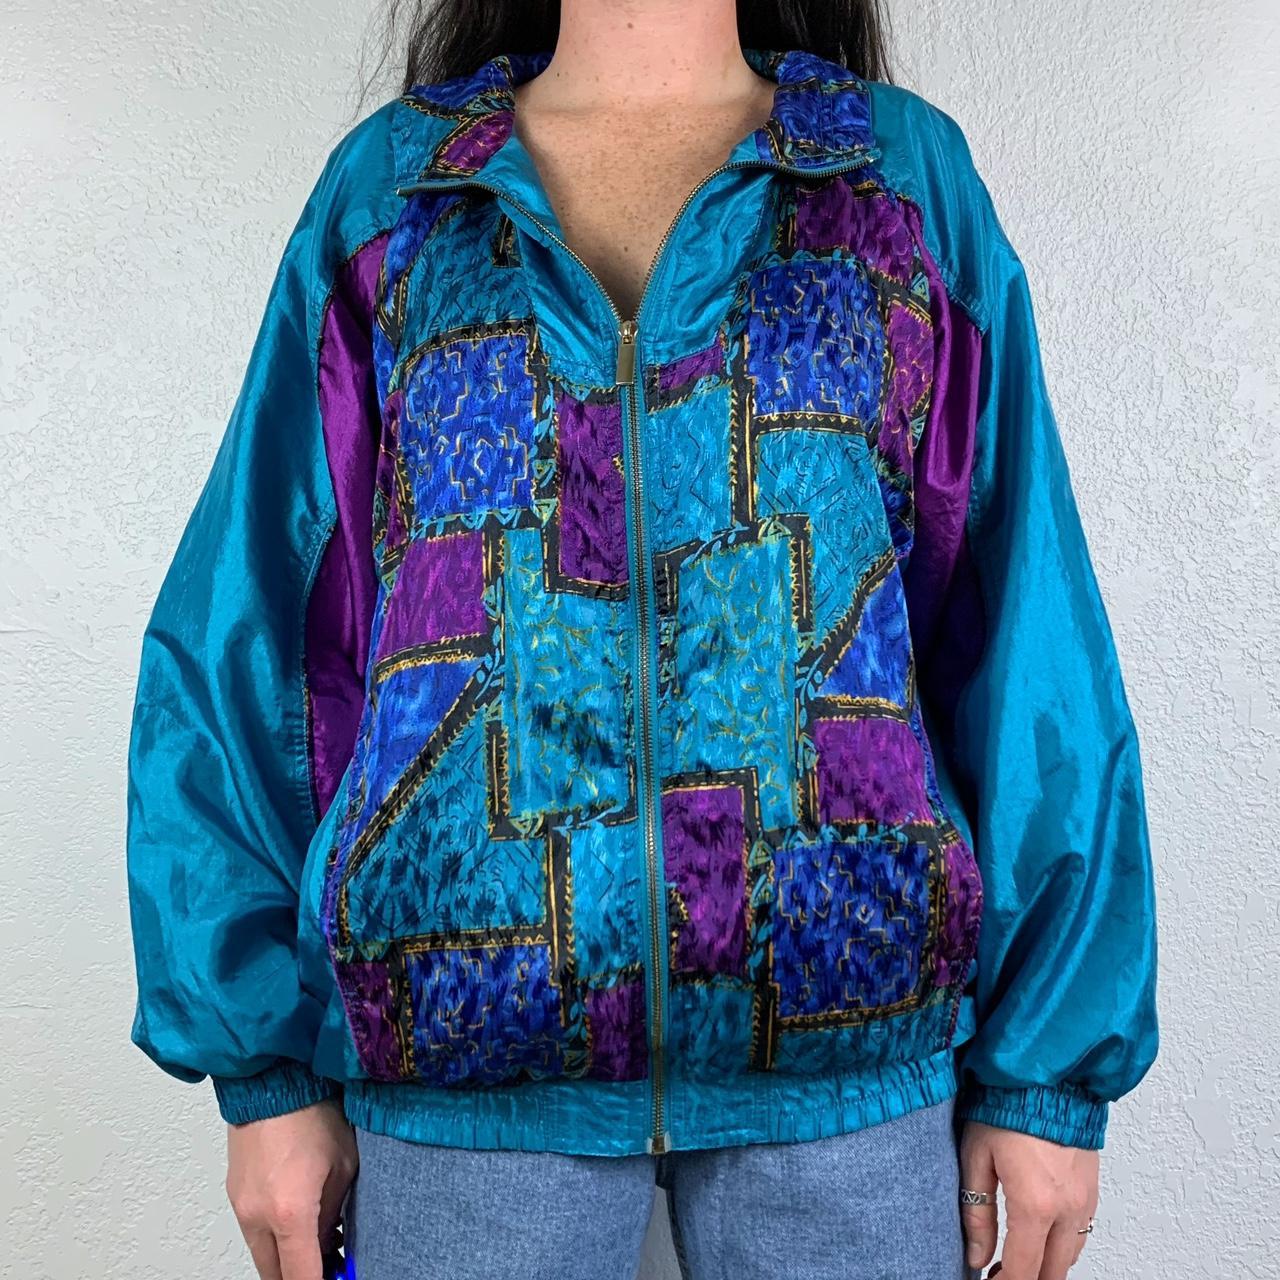 Basic Editions Women's Blue and Purple Jacket (2)